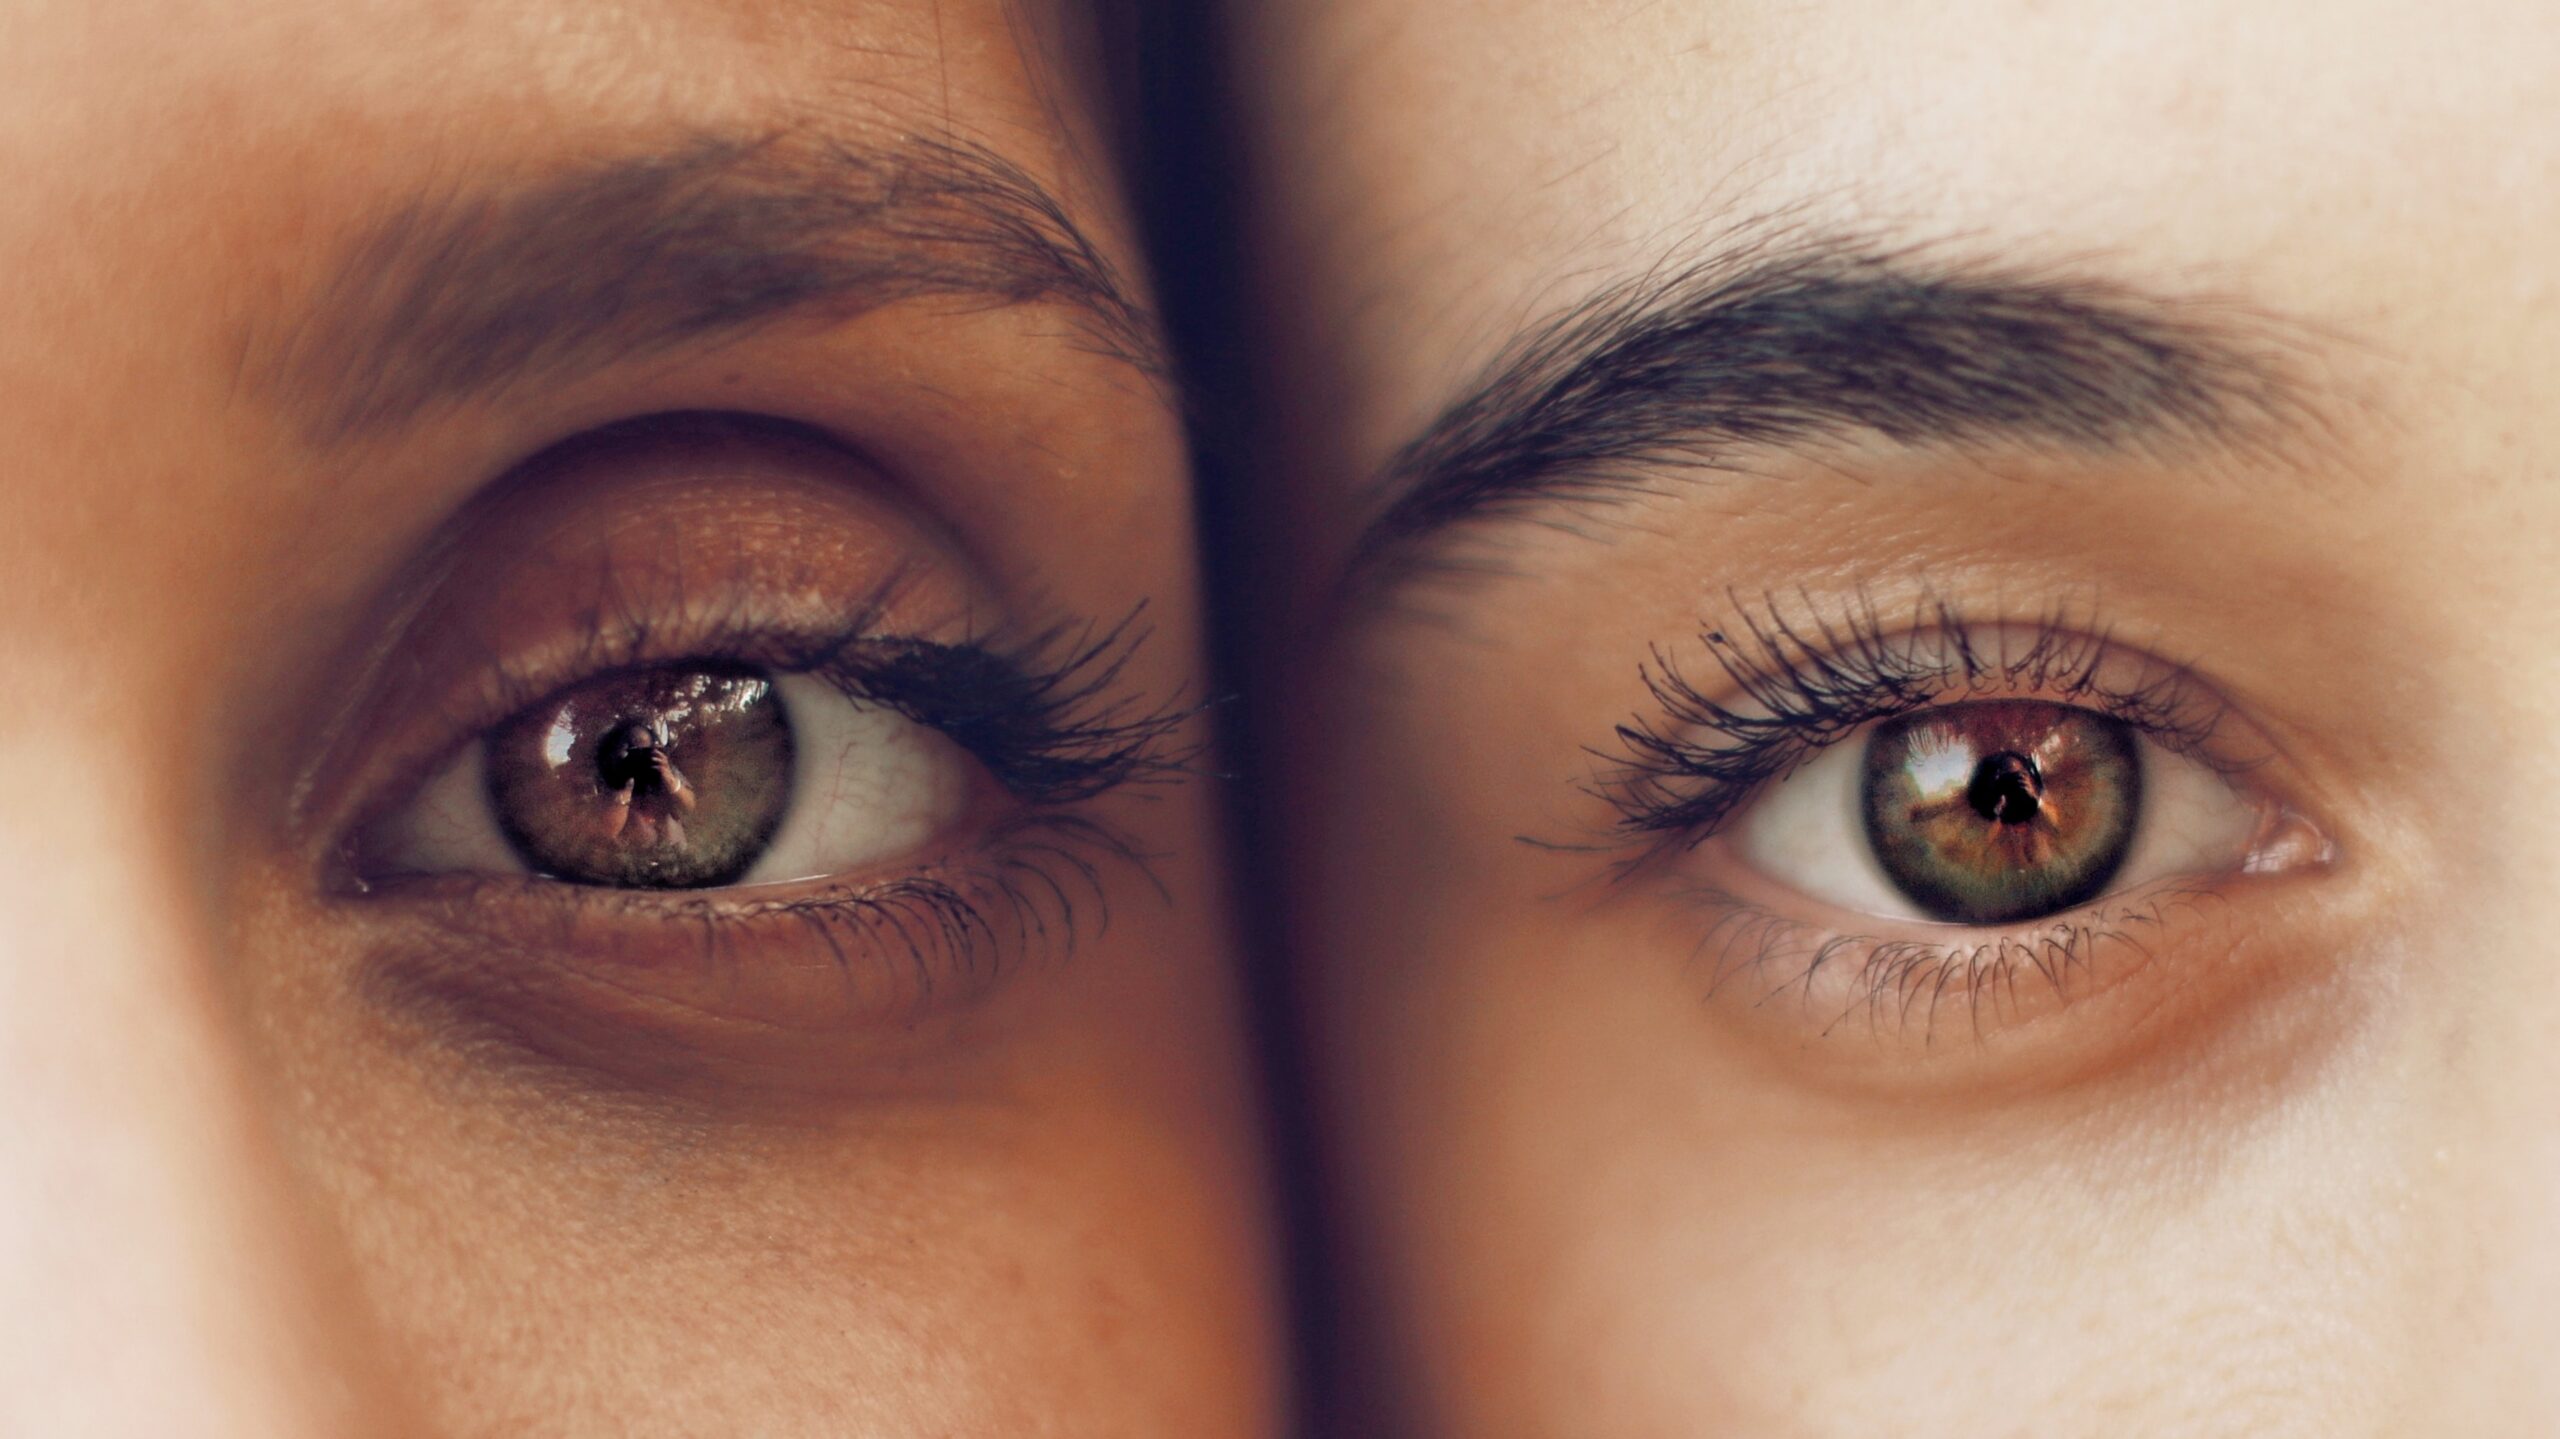 Eyes of two faces photographed close together. Extroverts and introverts - what are the differences? Mindletic Blog